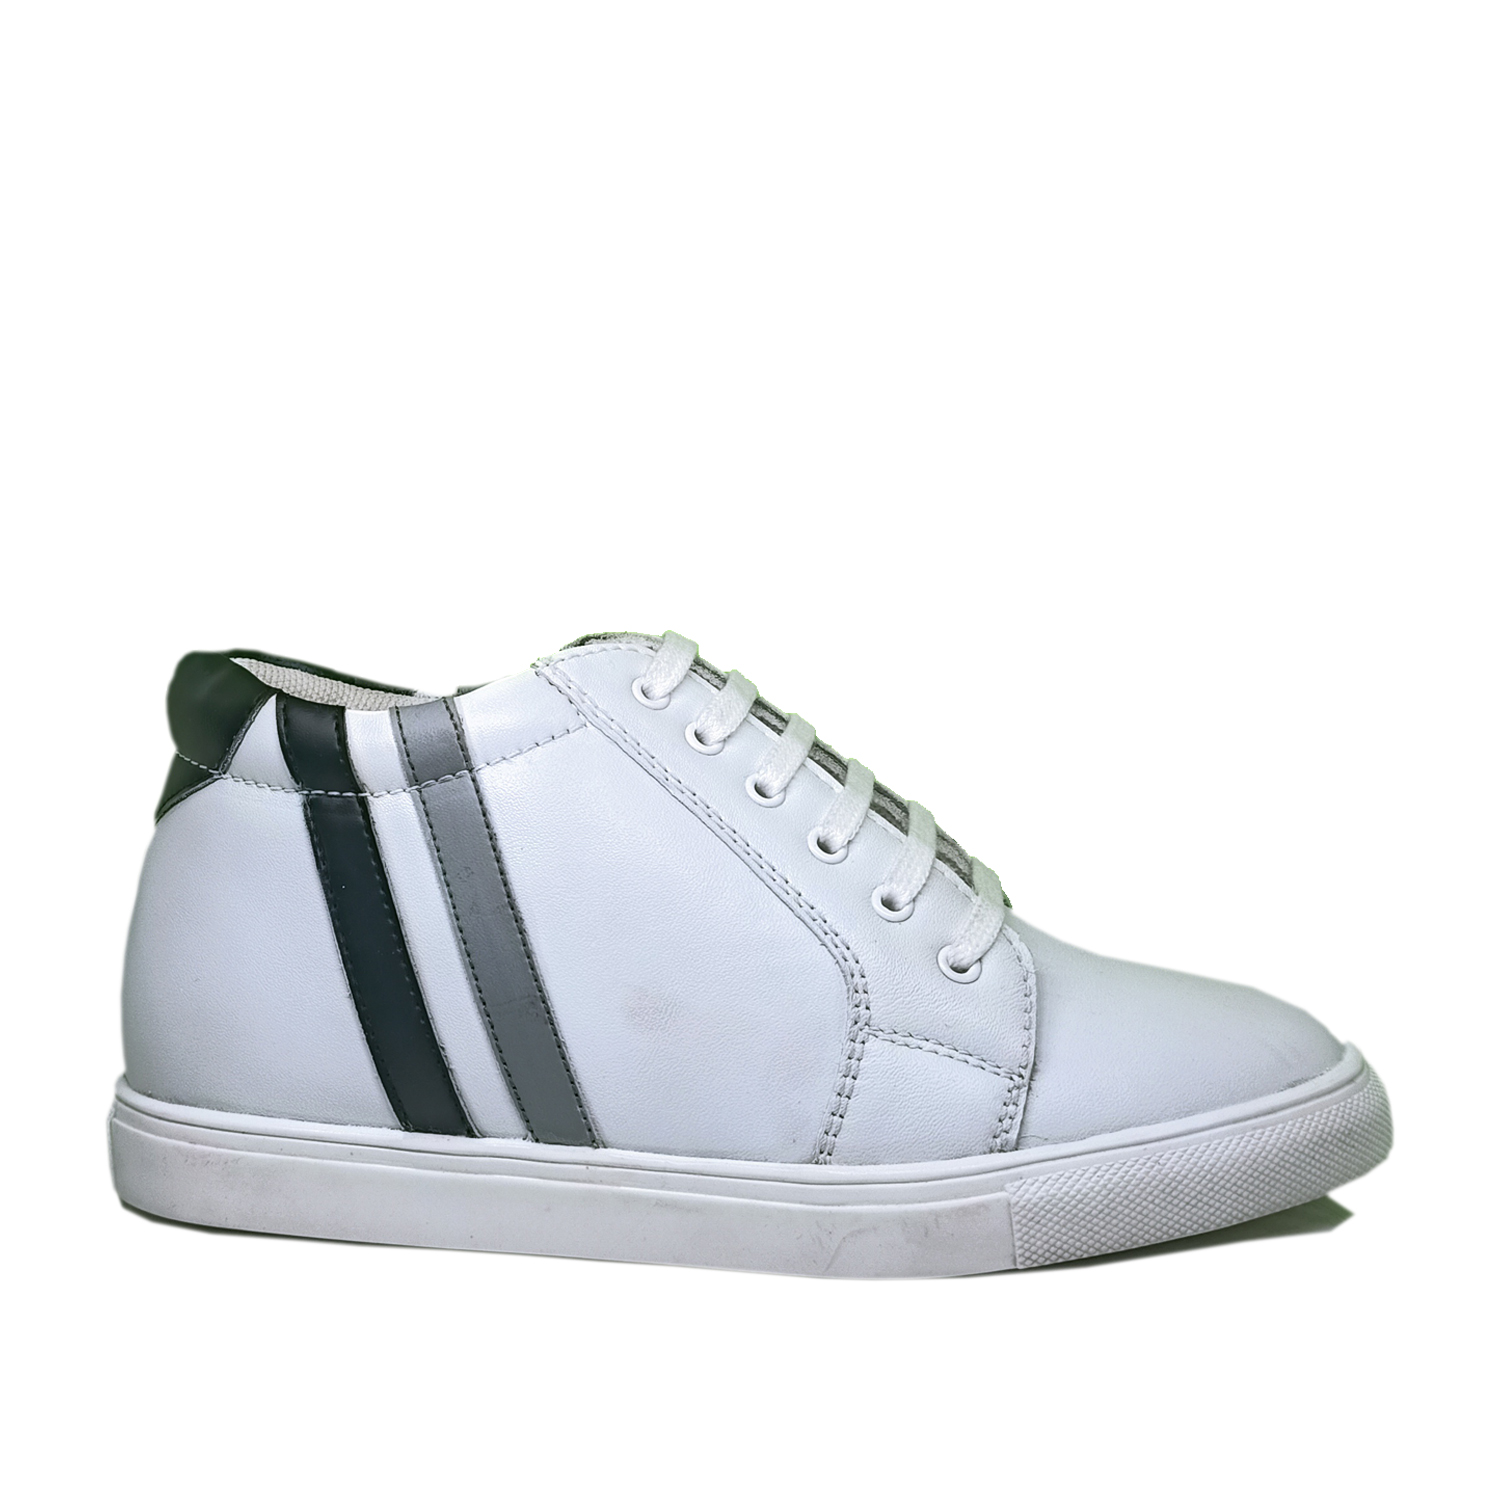 Buy Mast & Harbour Men White Sneakers - Casual Shoes for Men 1416272 |  Myntra